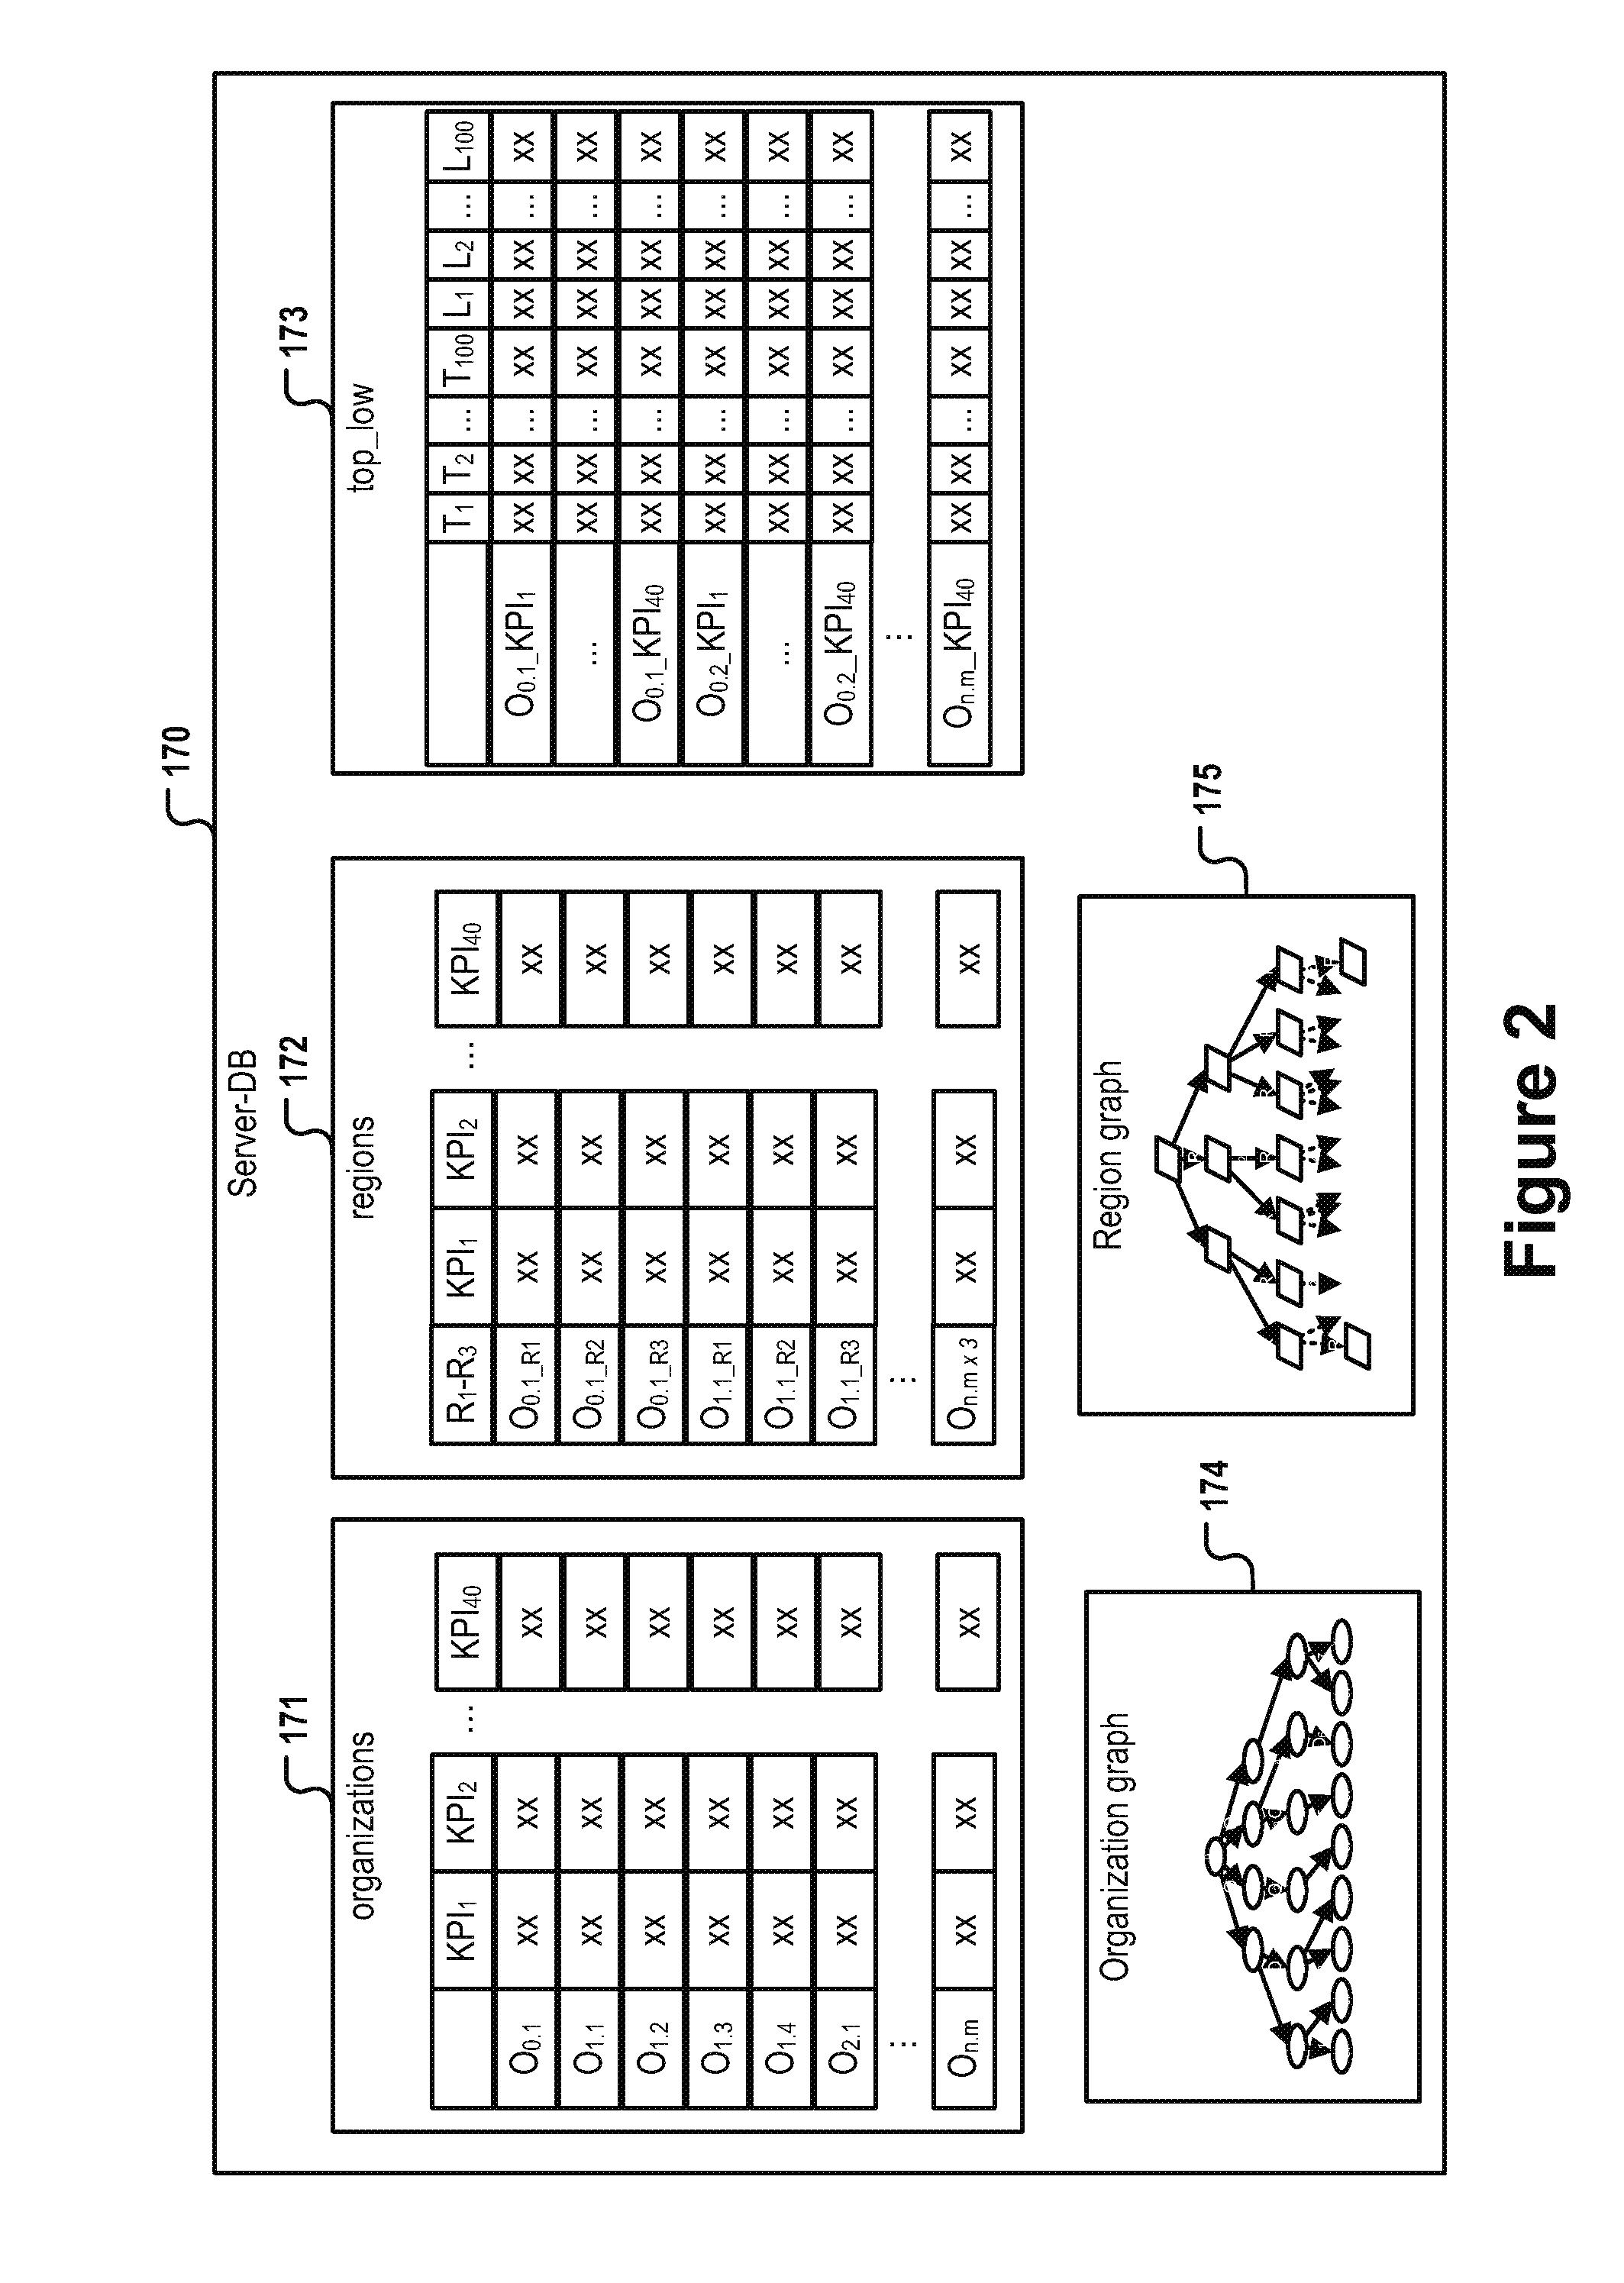 Computer-implemented method for specifying a processing operation